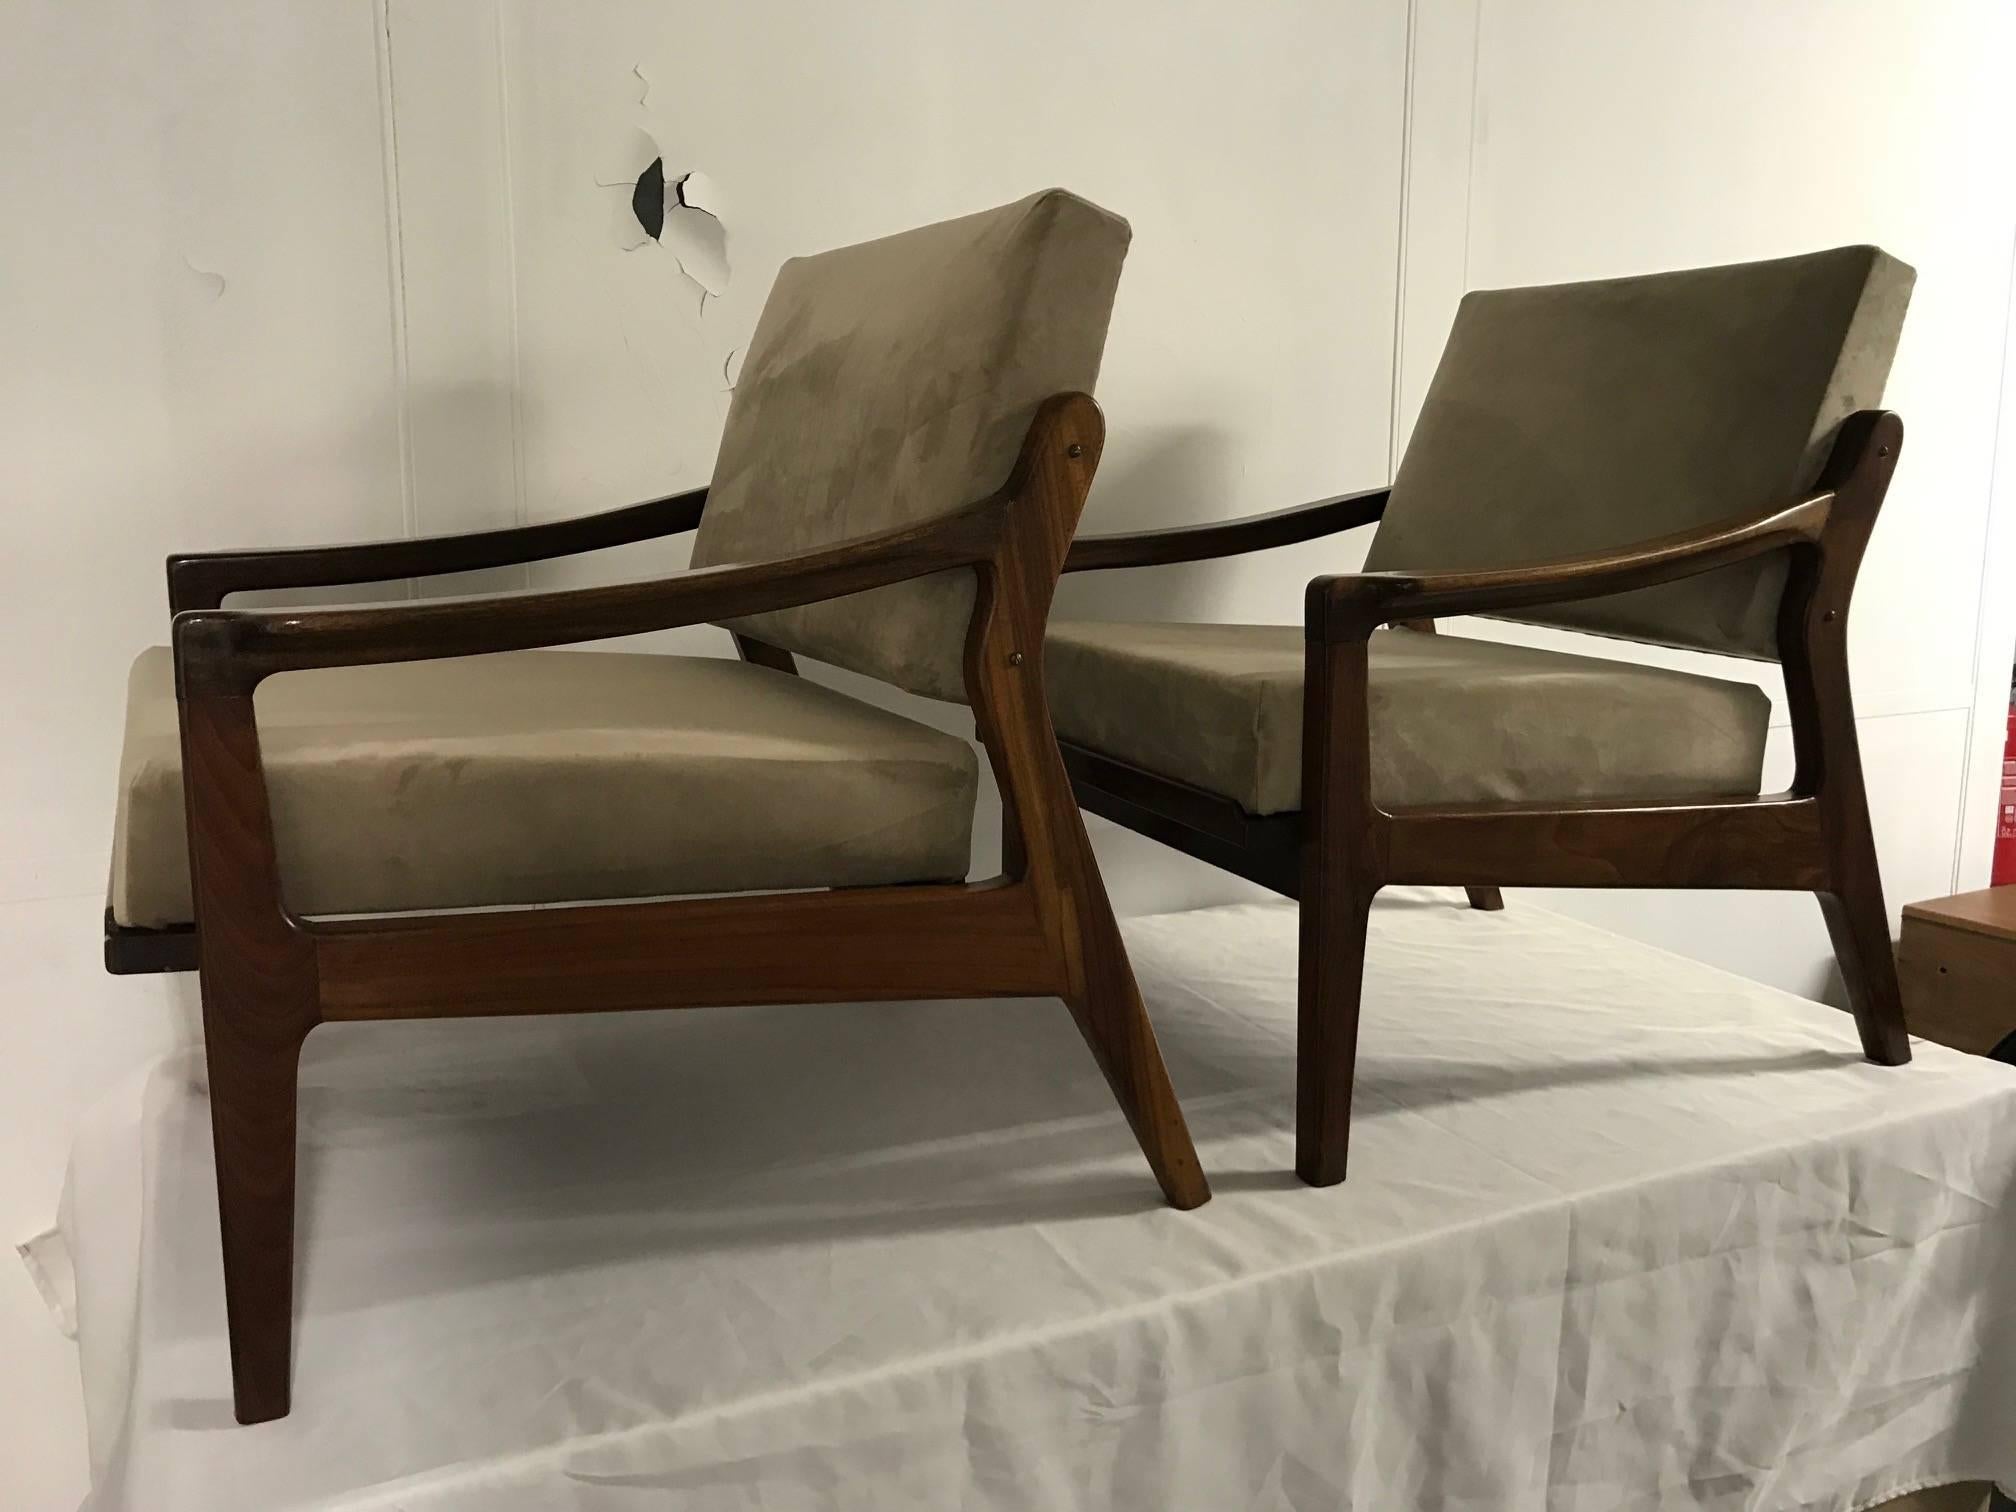 Mid-20th Century Altamira Armchairs, Portugal, 1960s For Sale